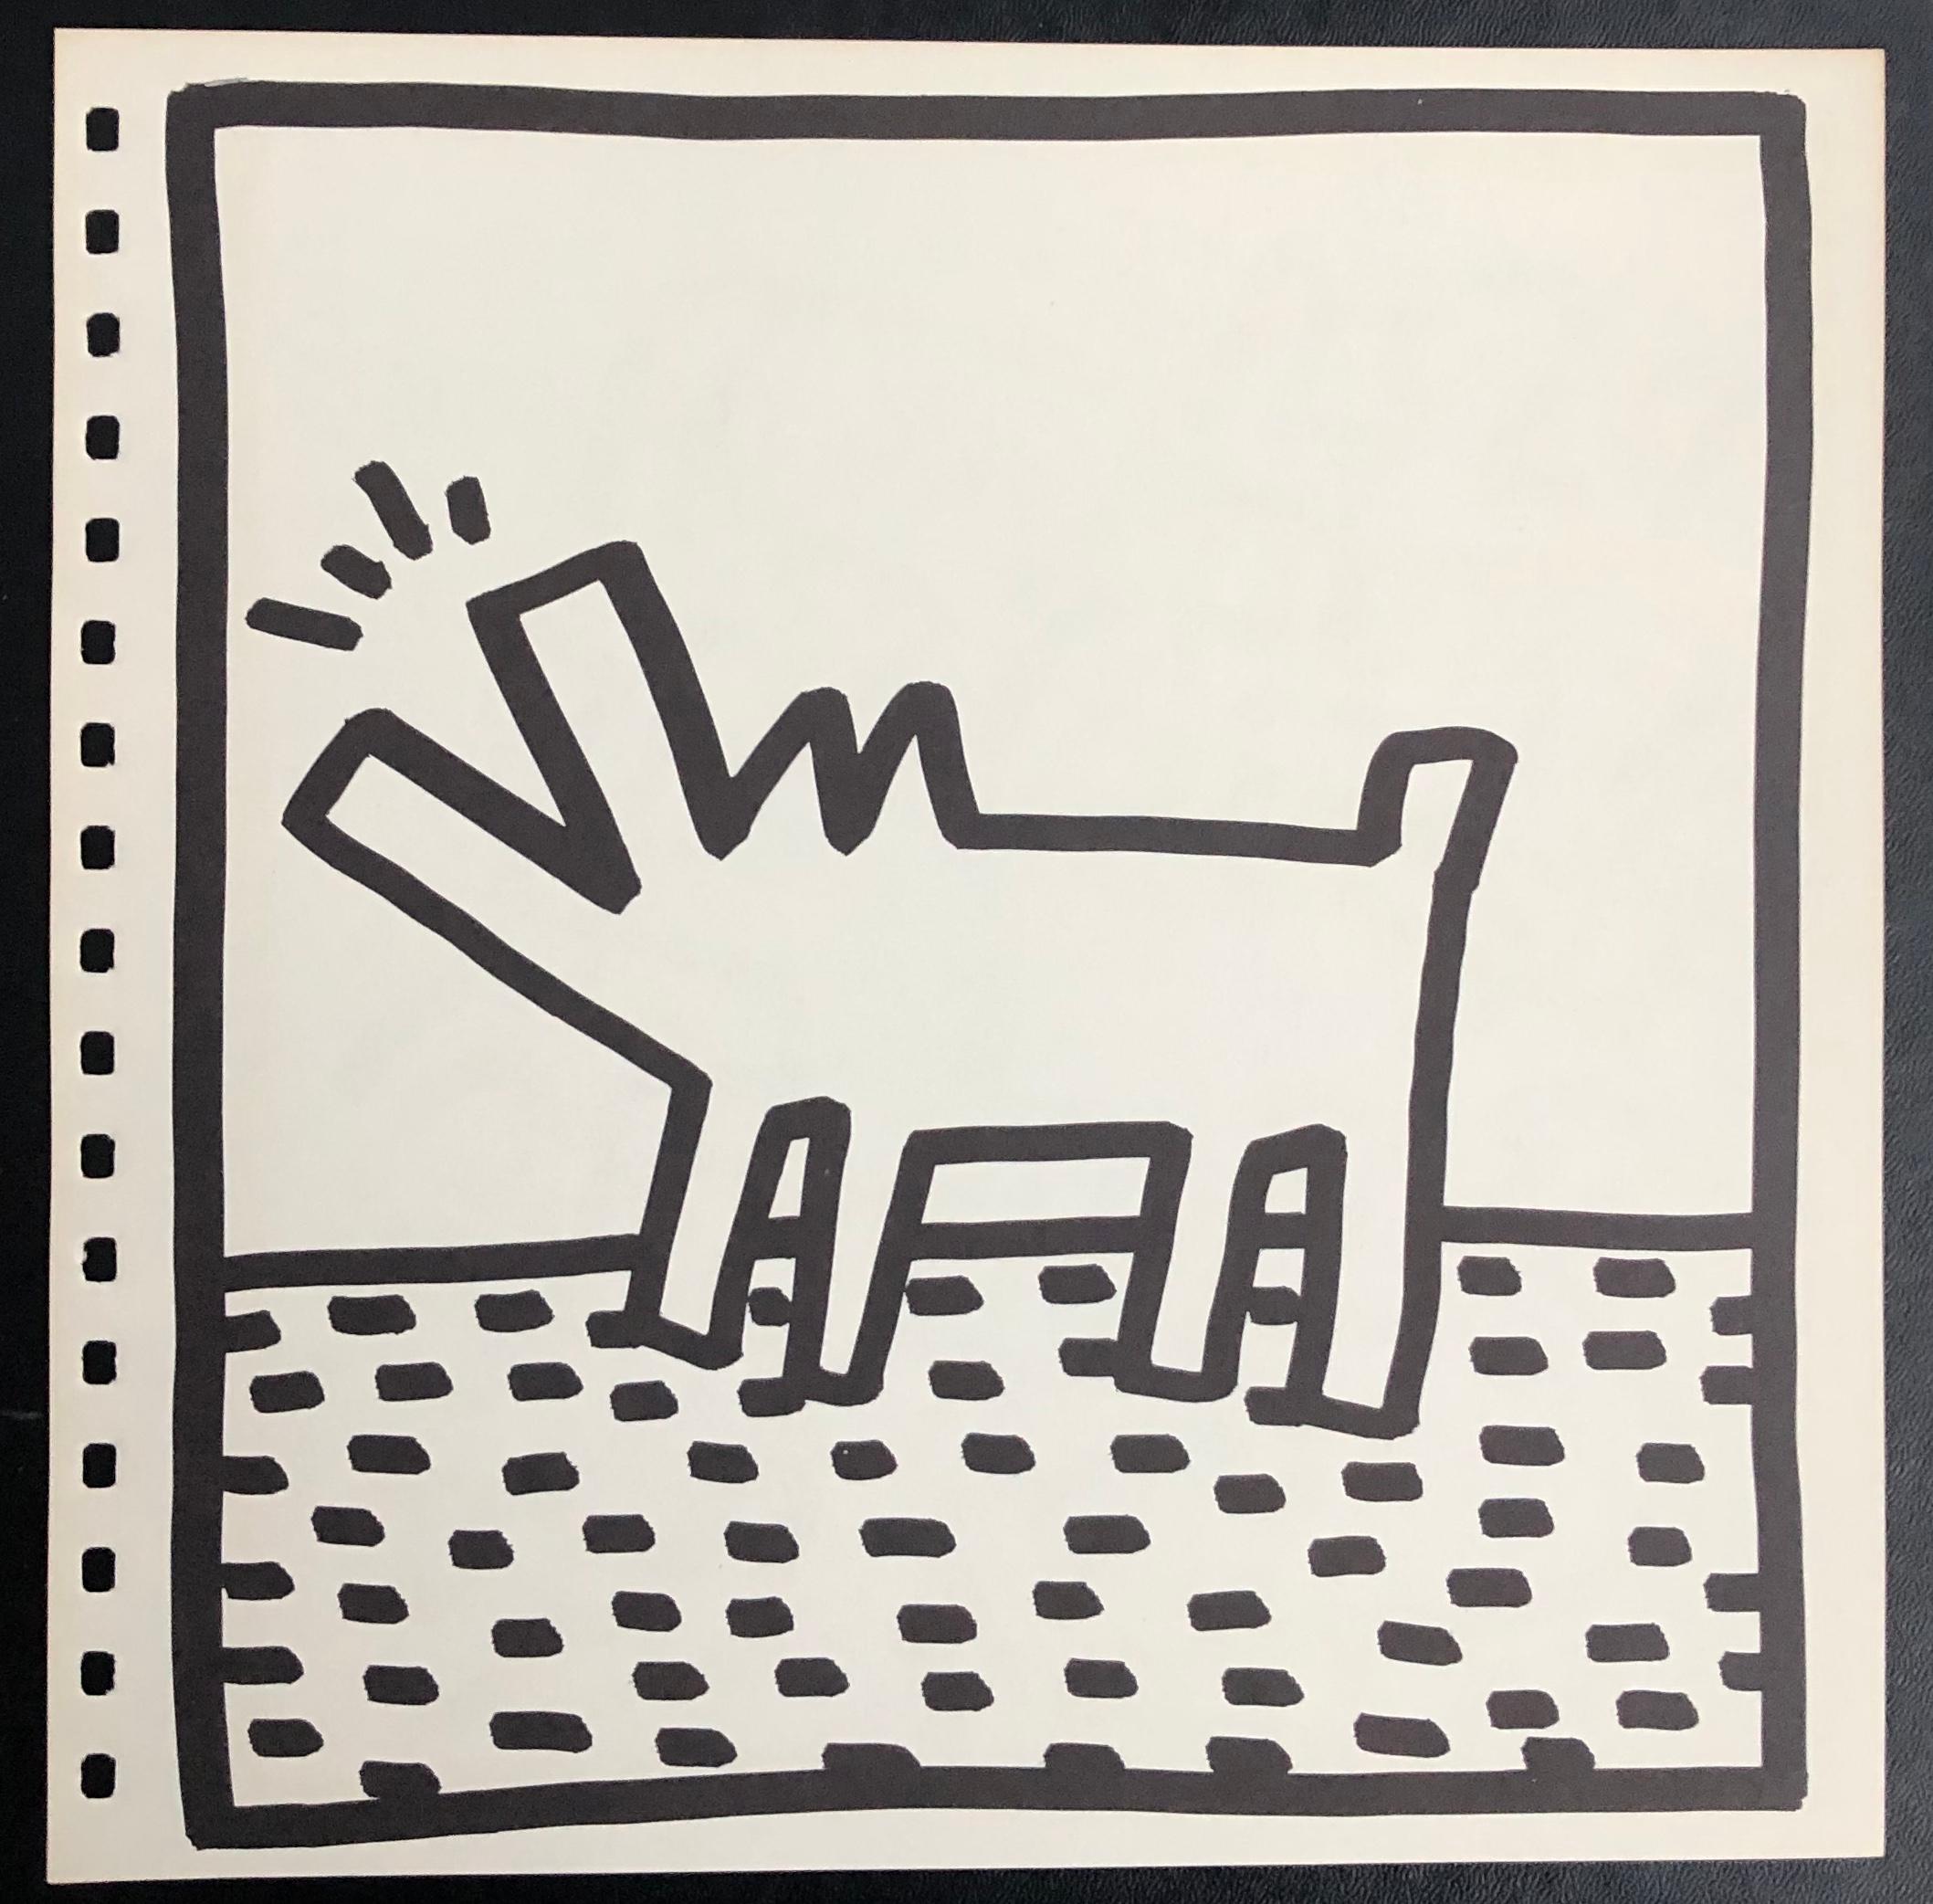 Keith Haring (untitled) barking dog lithograph 1982 (Keith Haring prints) - Print by (after) Keith Haring